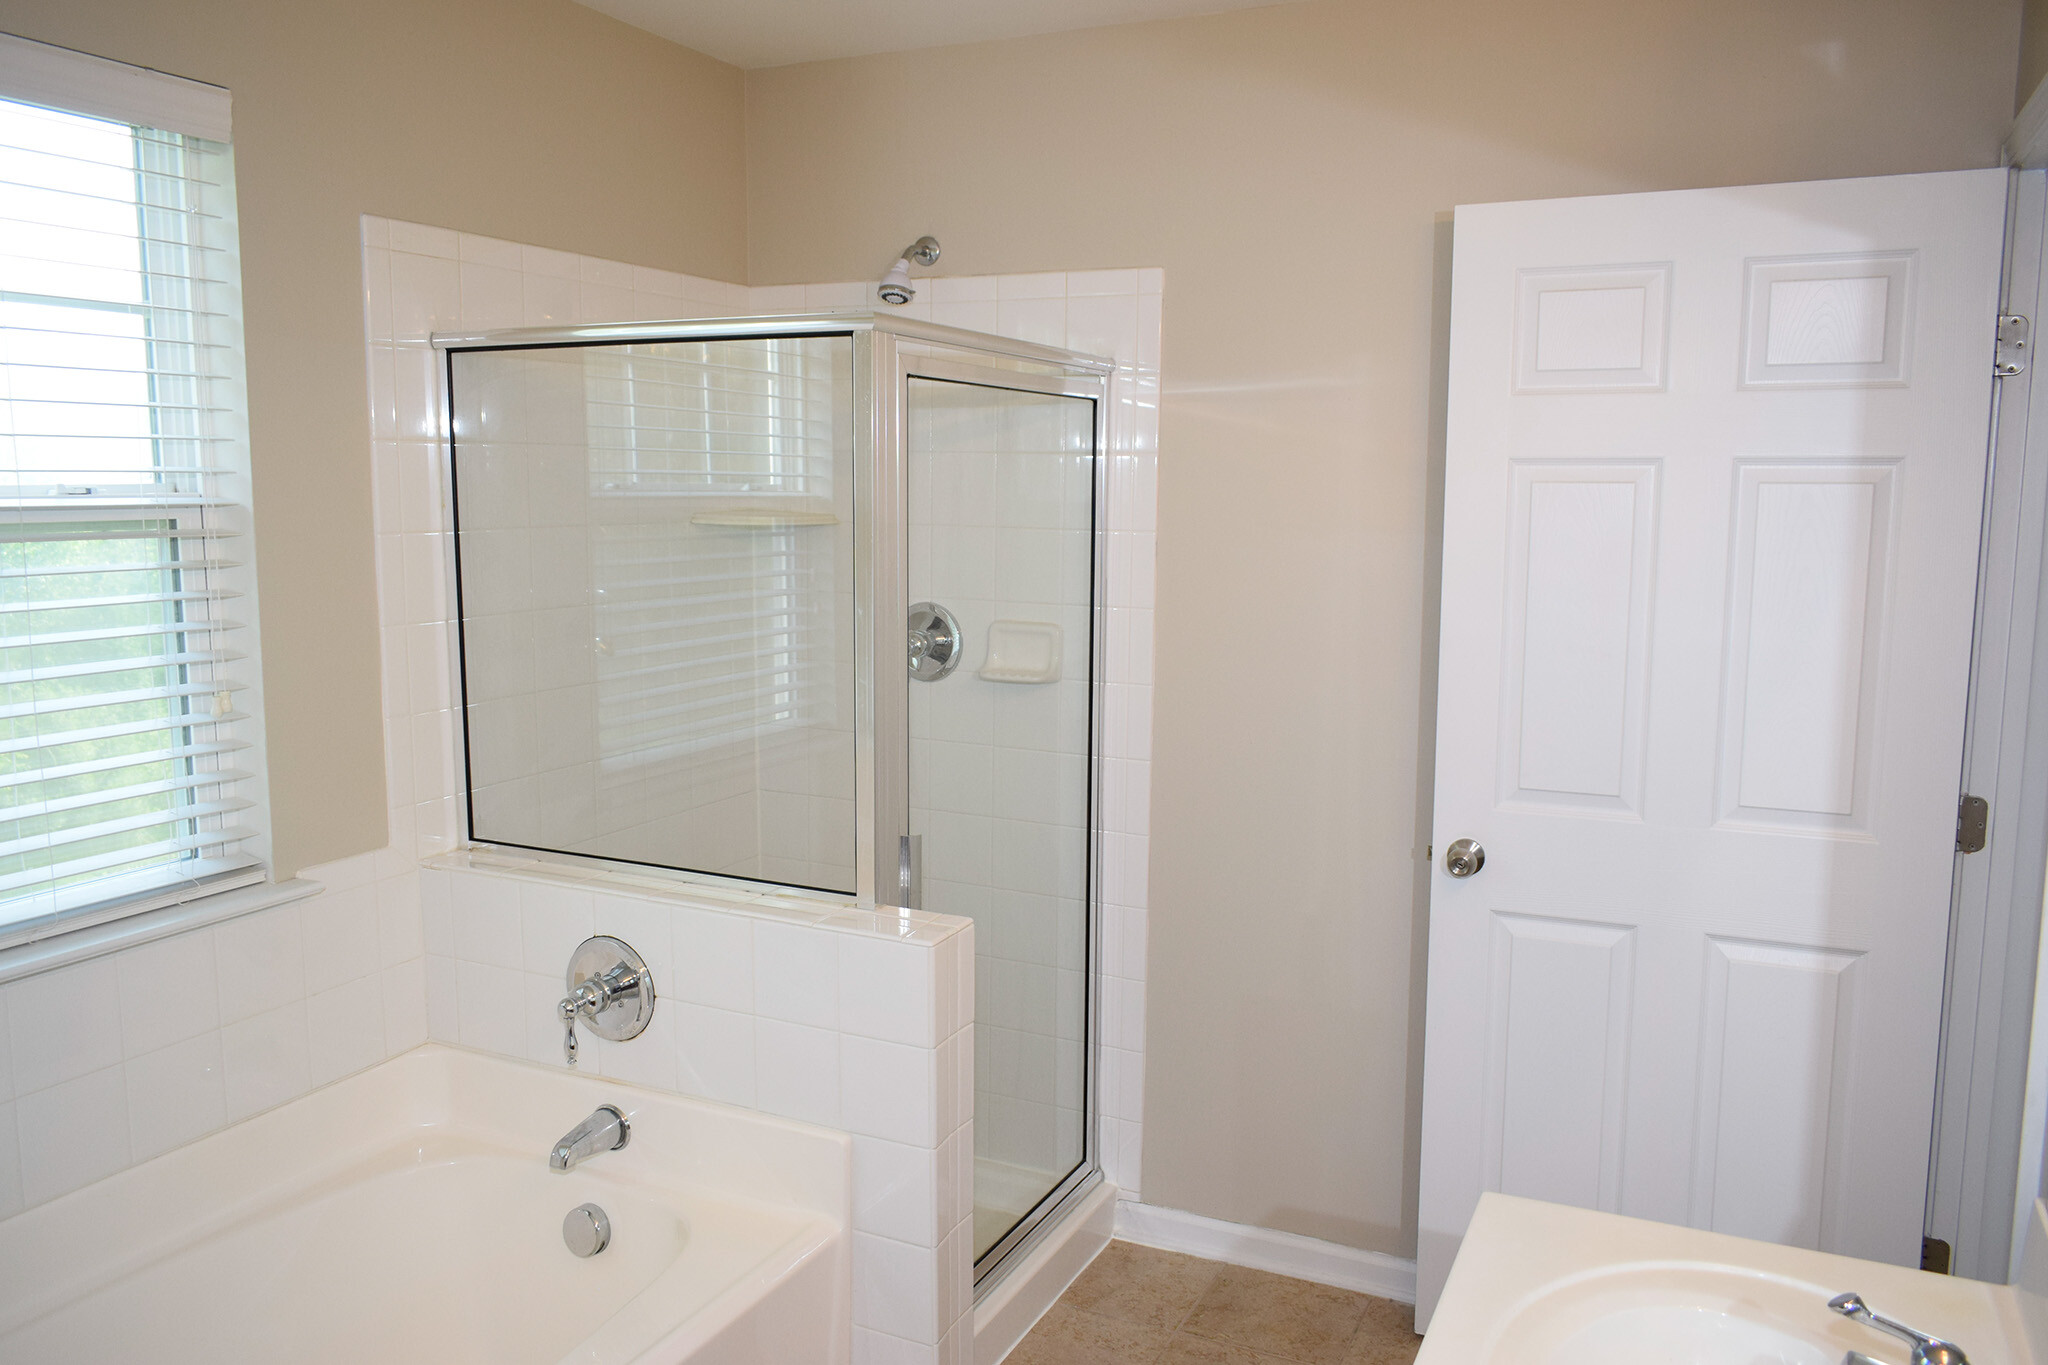 Garden tub and separate shower in the master bath